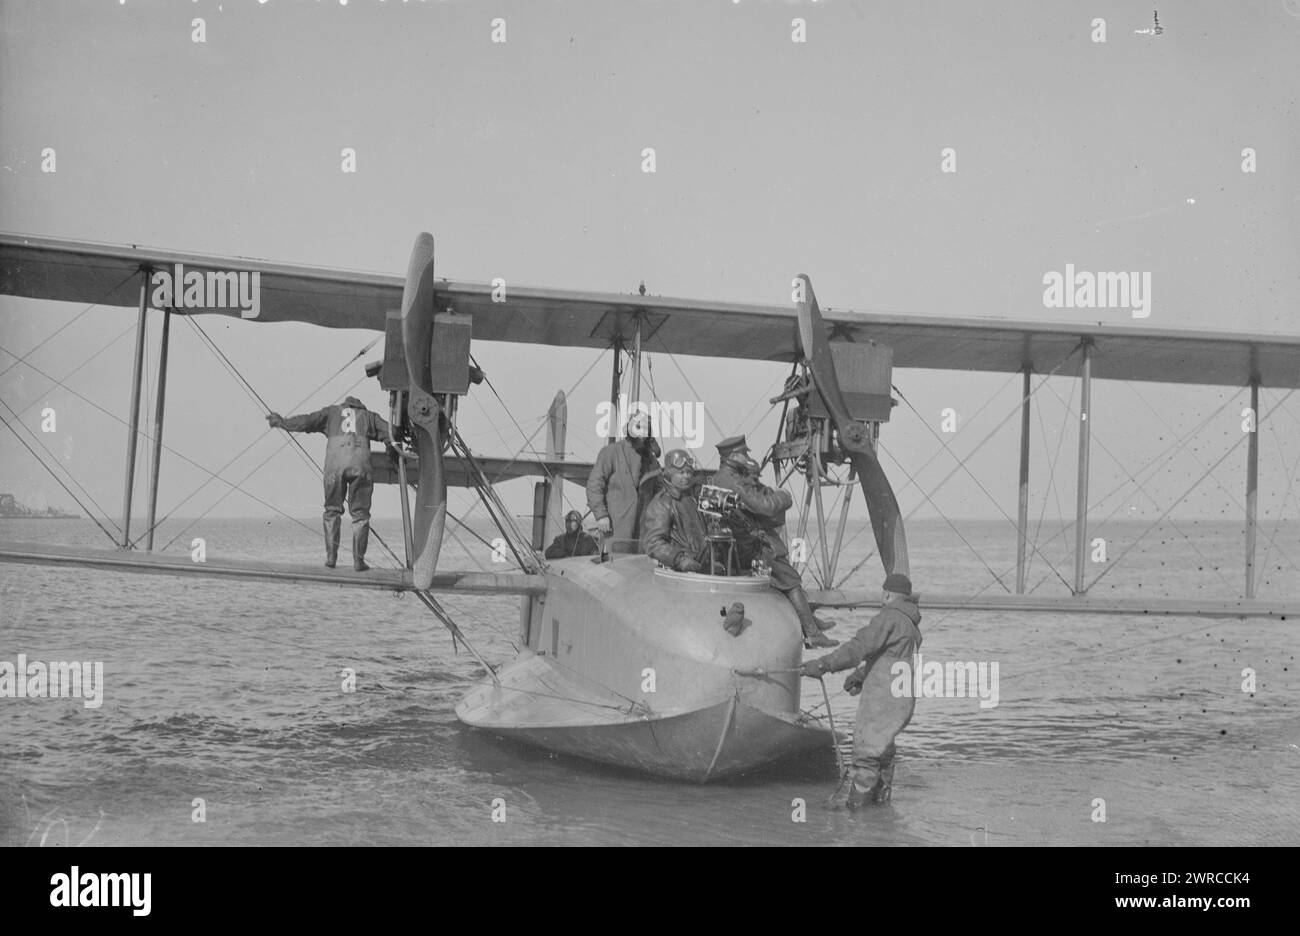 At Rockaway from Hampton Roads, Photograph shows a F5L Flying Boat after landing from a trip from Hampton Roads, Virginia to Rockaway Naval Air Station, Queens, New York City. A movie camera is mounted in the forward gunner'sposition., between ca. 1915 and ca. 1920, Glass negatives, 1 negative: glass Stock Photo